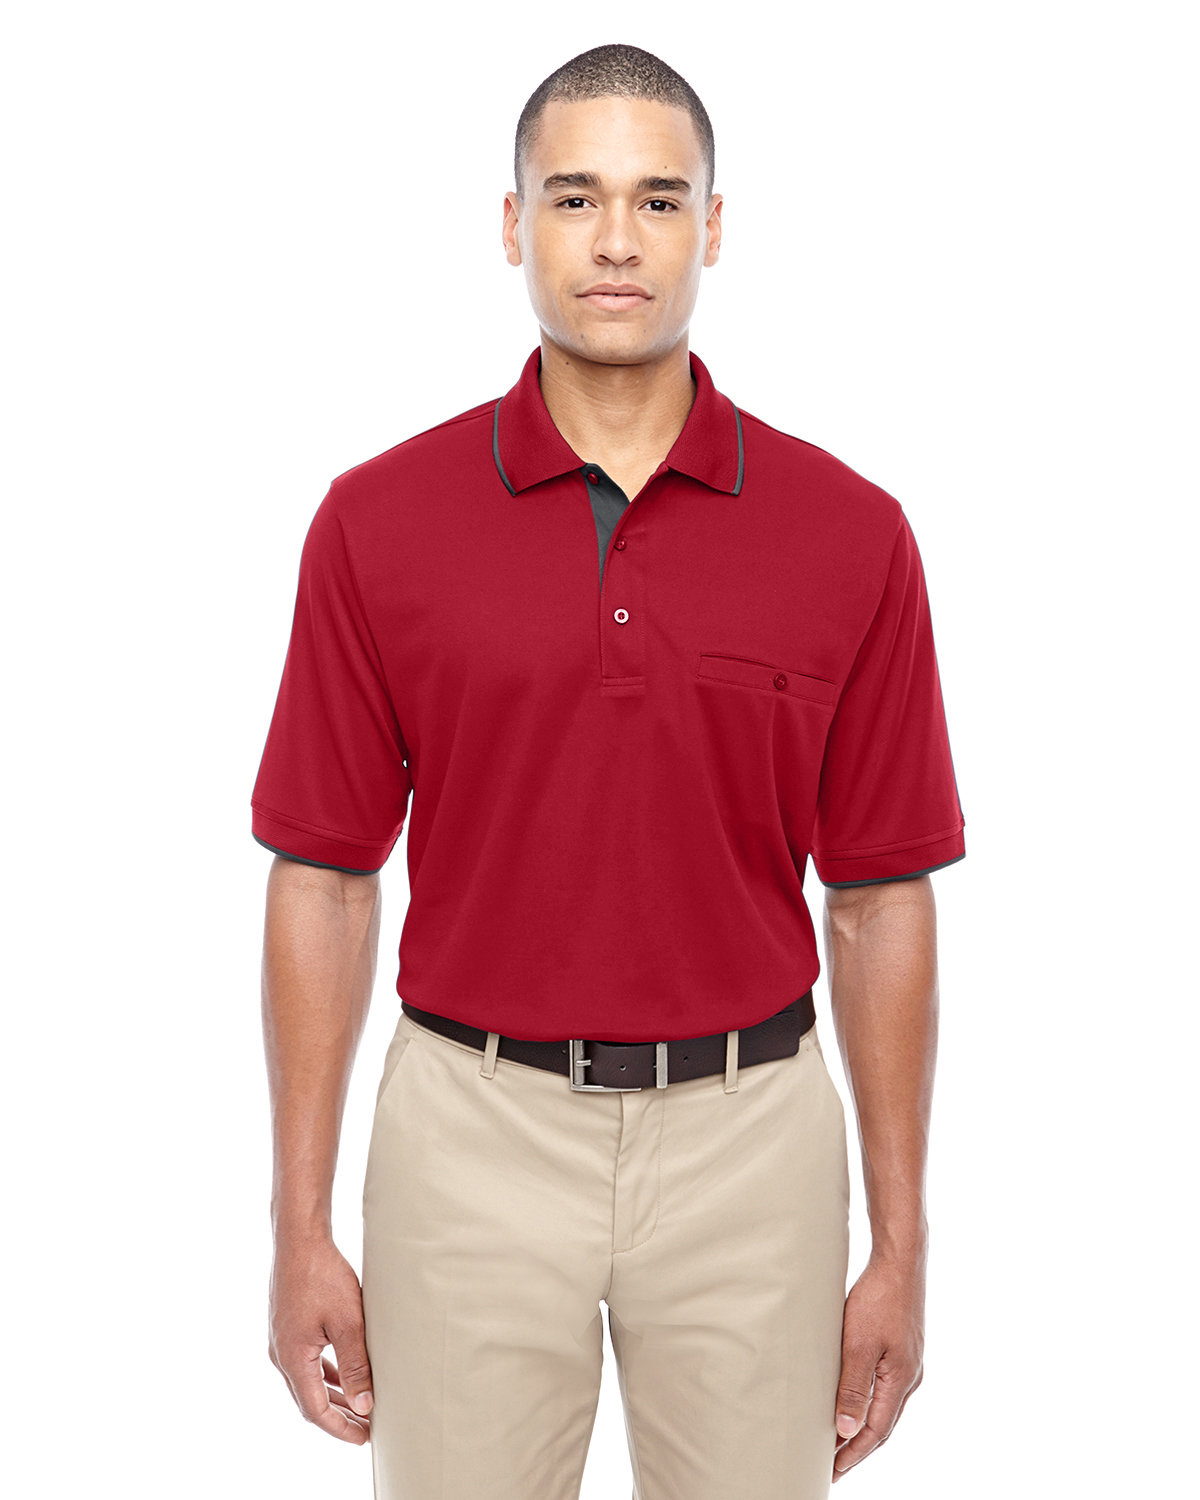 Core 365 Men's Motive Performance Piqué Polo with Tipped Collar CLASSC RED/ CRBN 